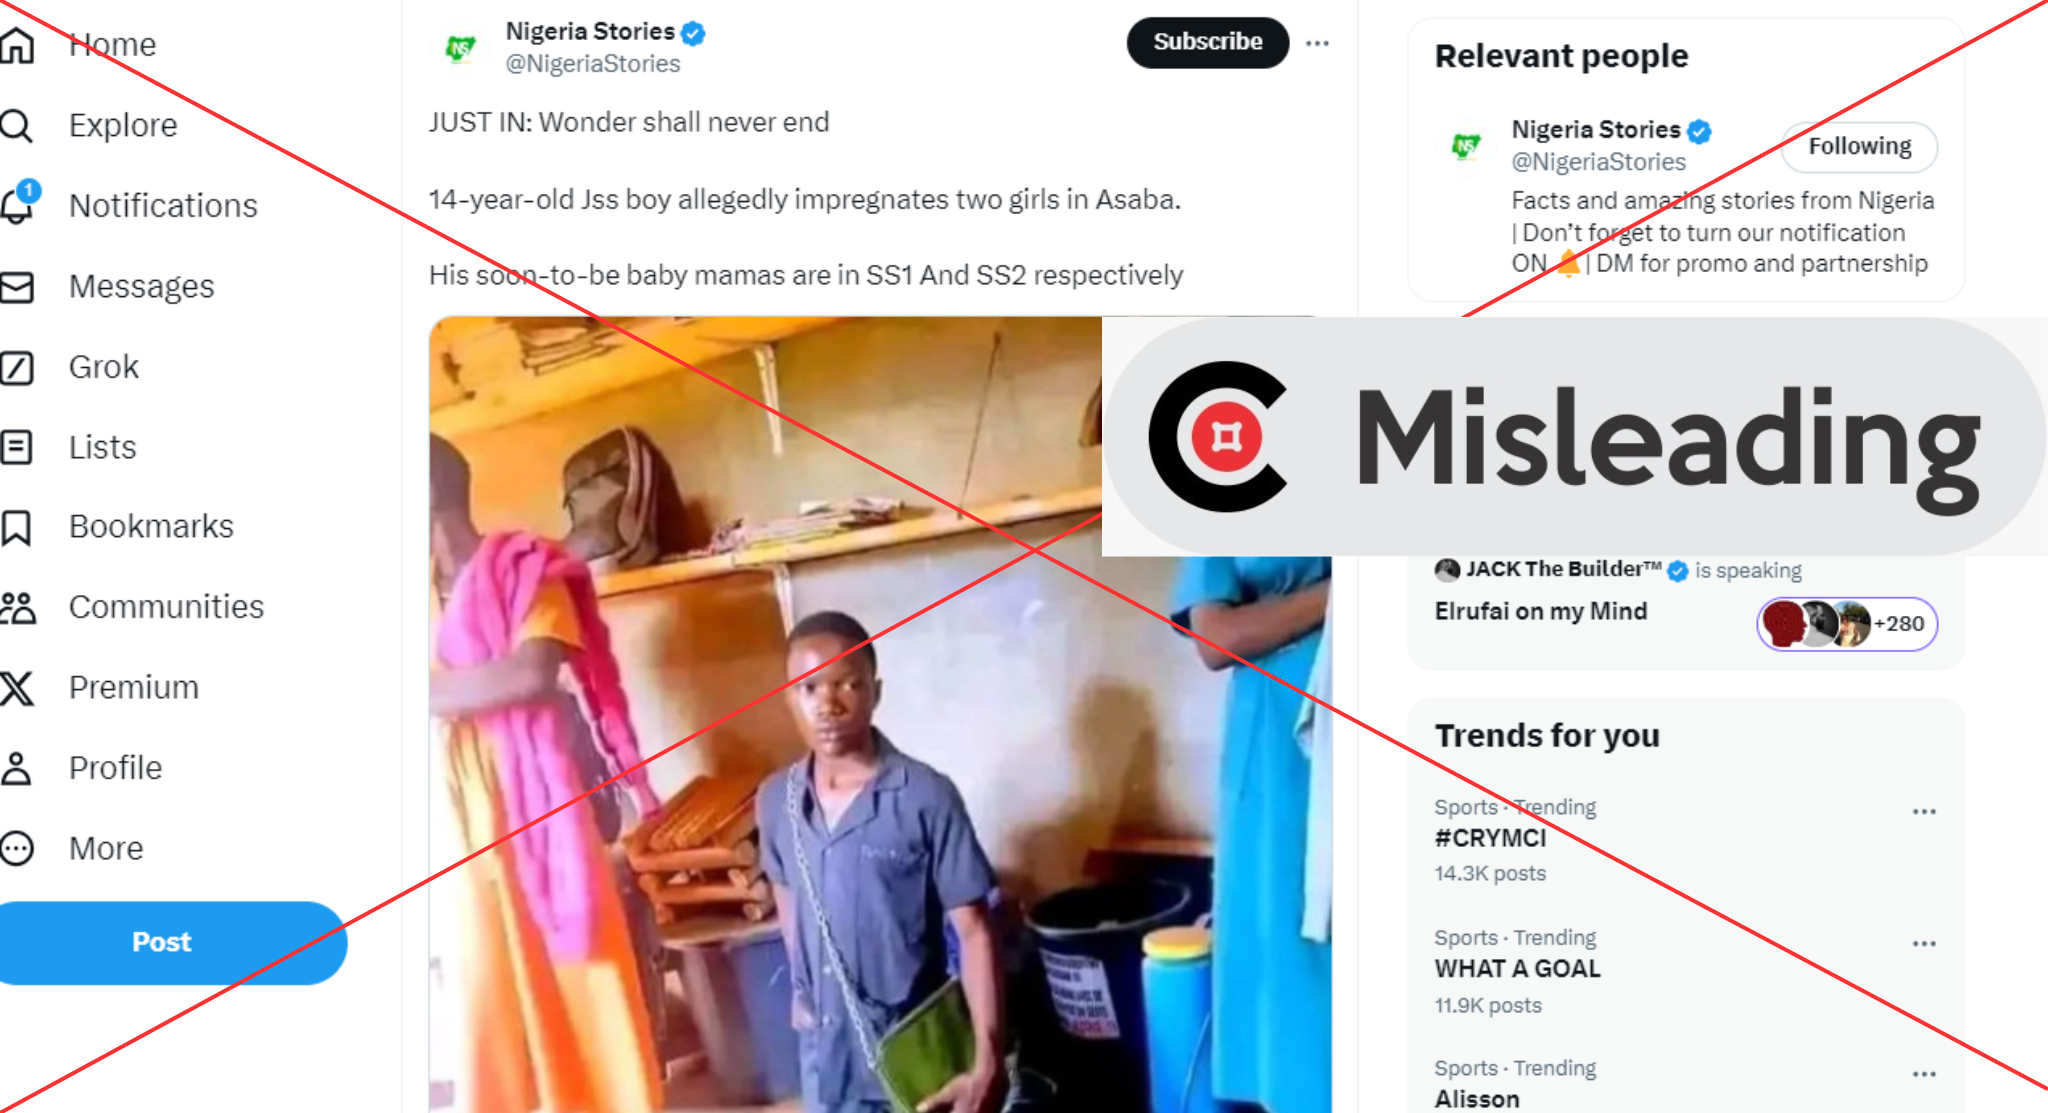 Screenshot of an image purportedly showing a Nigerian student who impregnated two girls in Asaba, Nigeria. The claim is misleading the image is from Cameroun